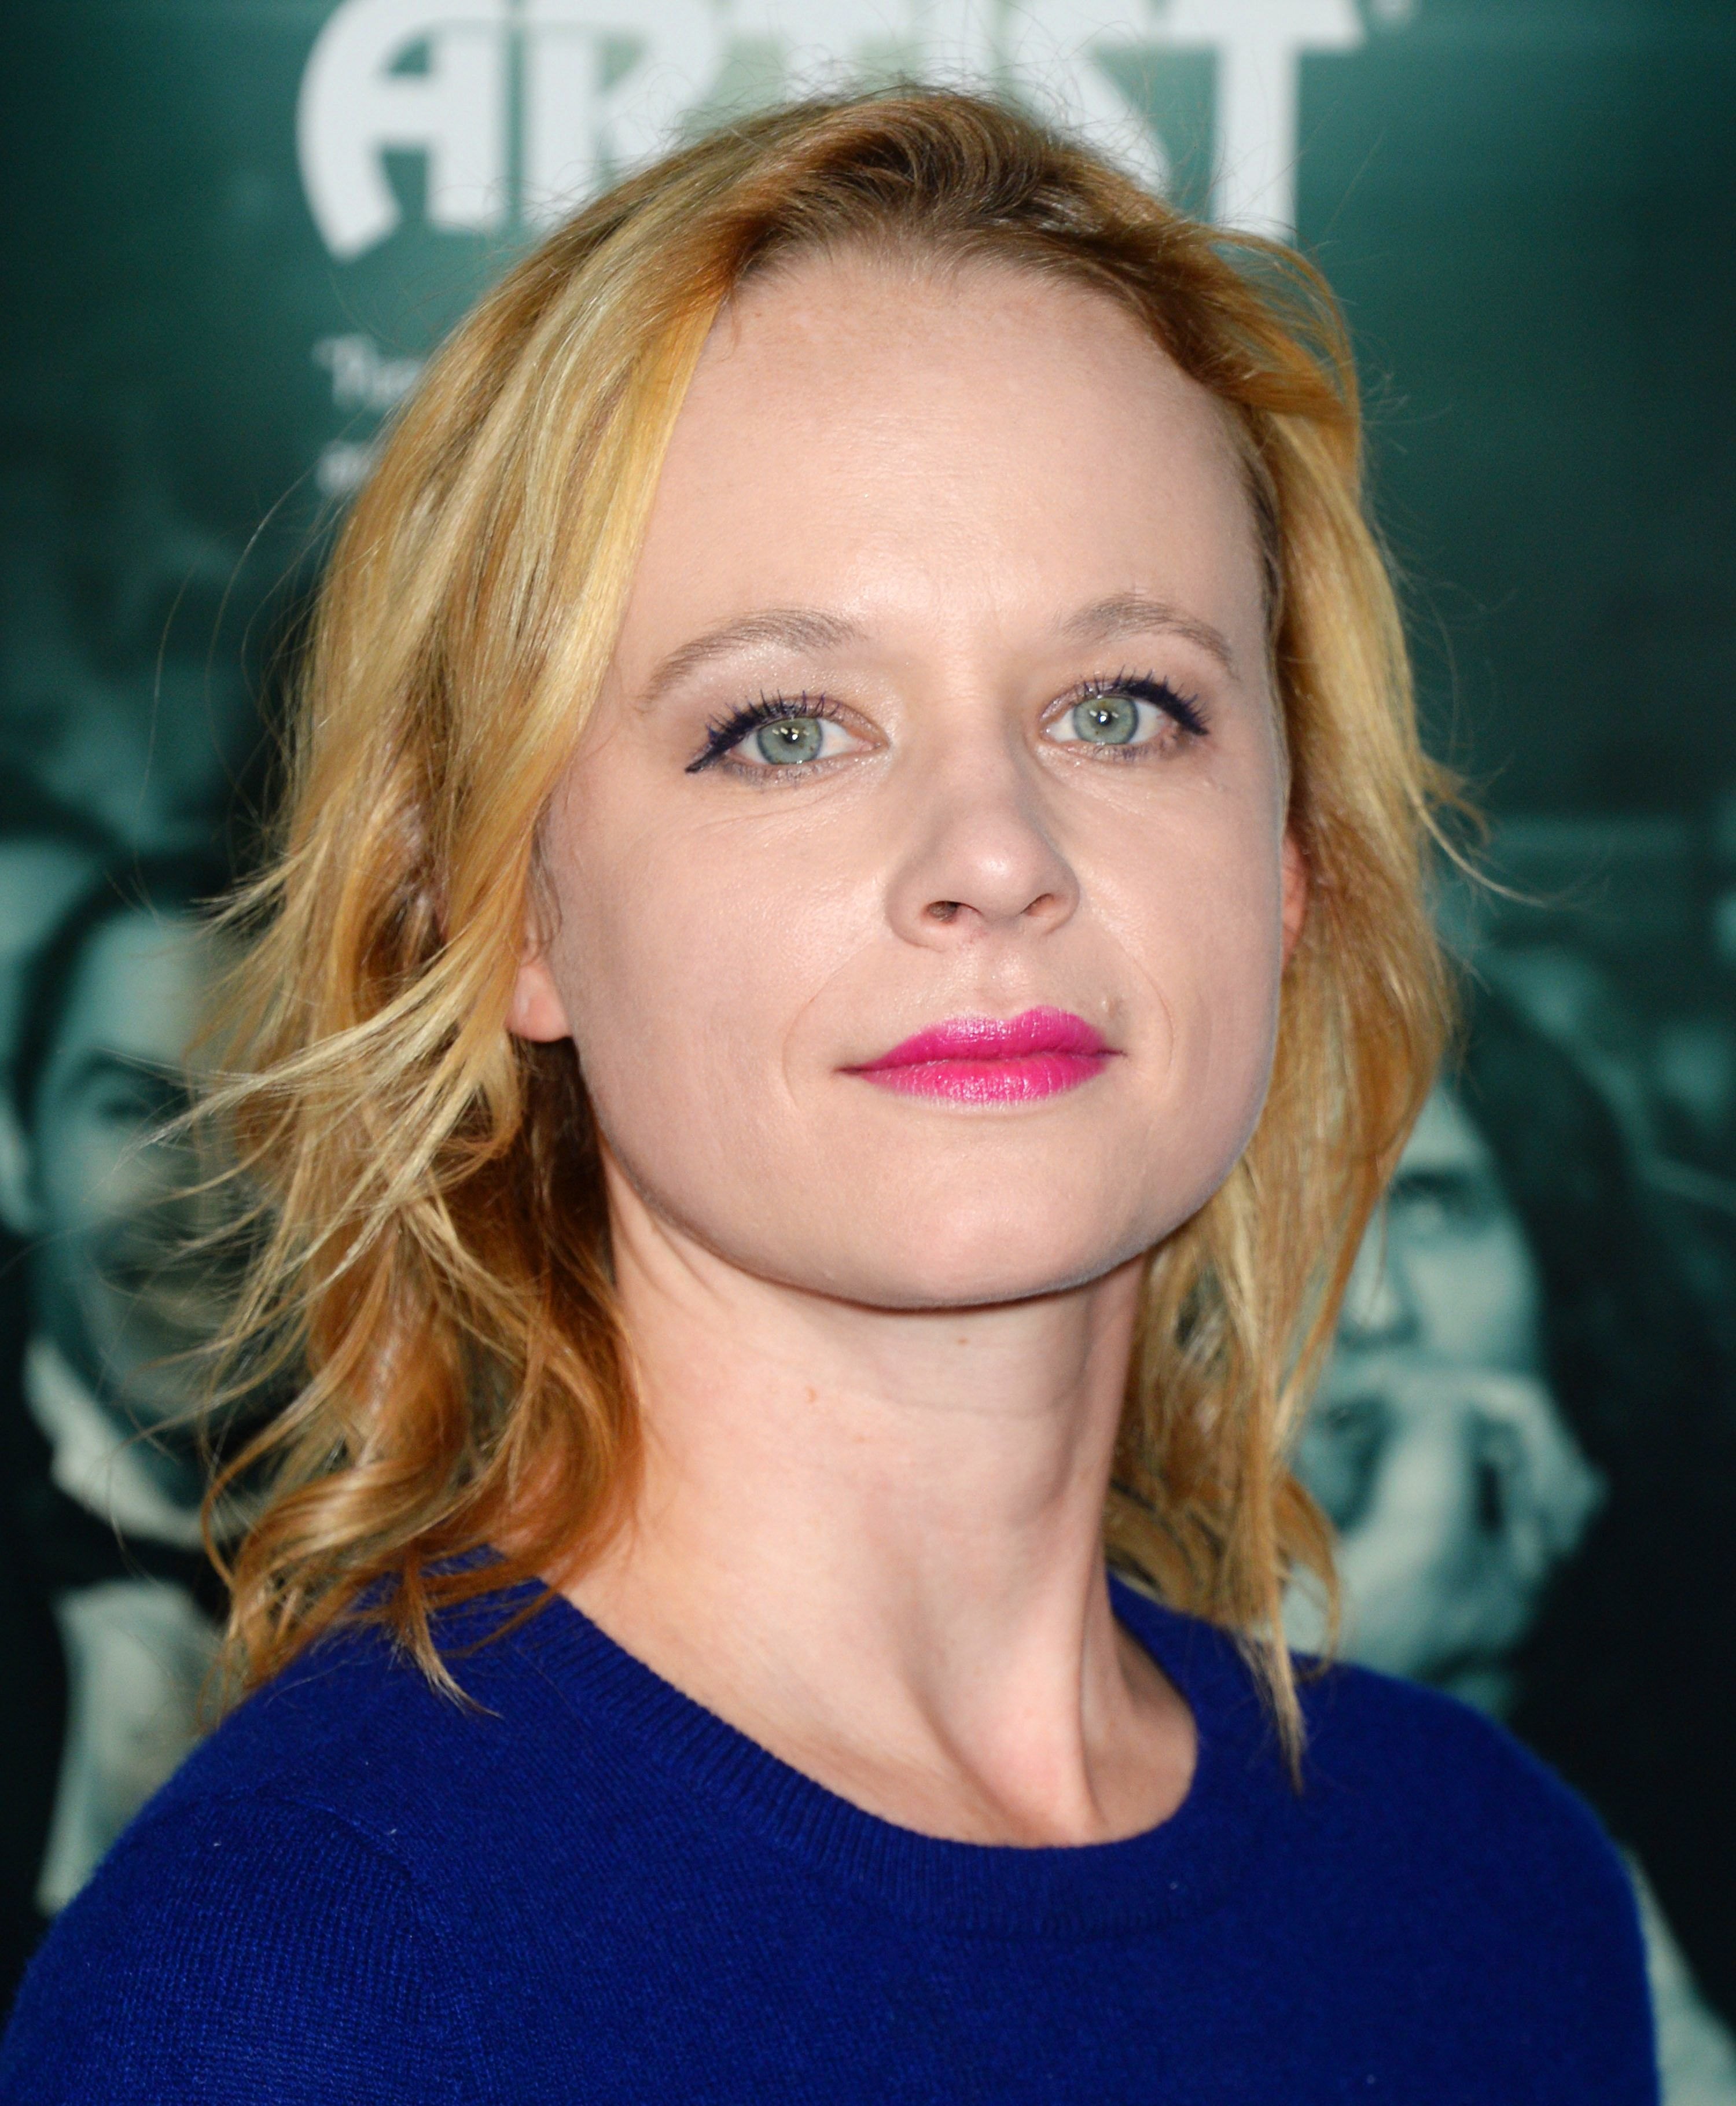 Photo of Thora for fans of Thora Birch. 